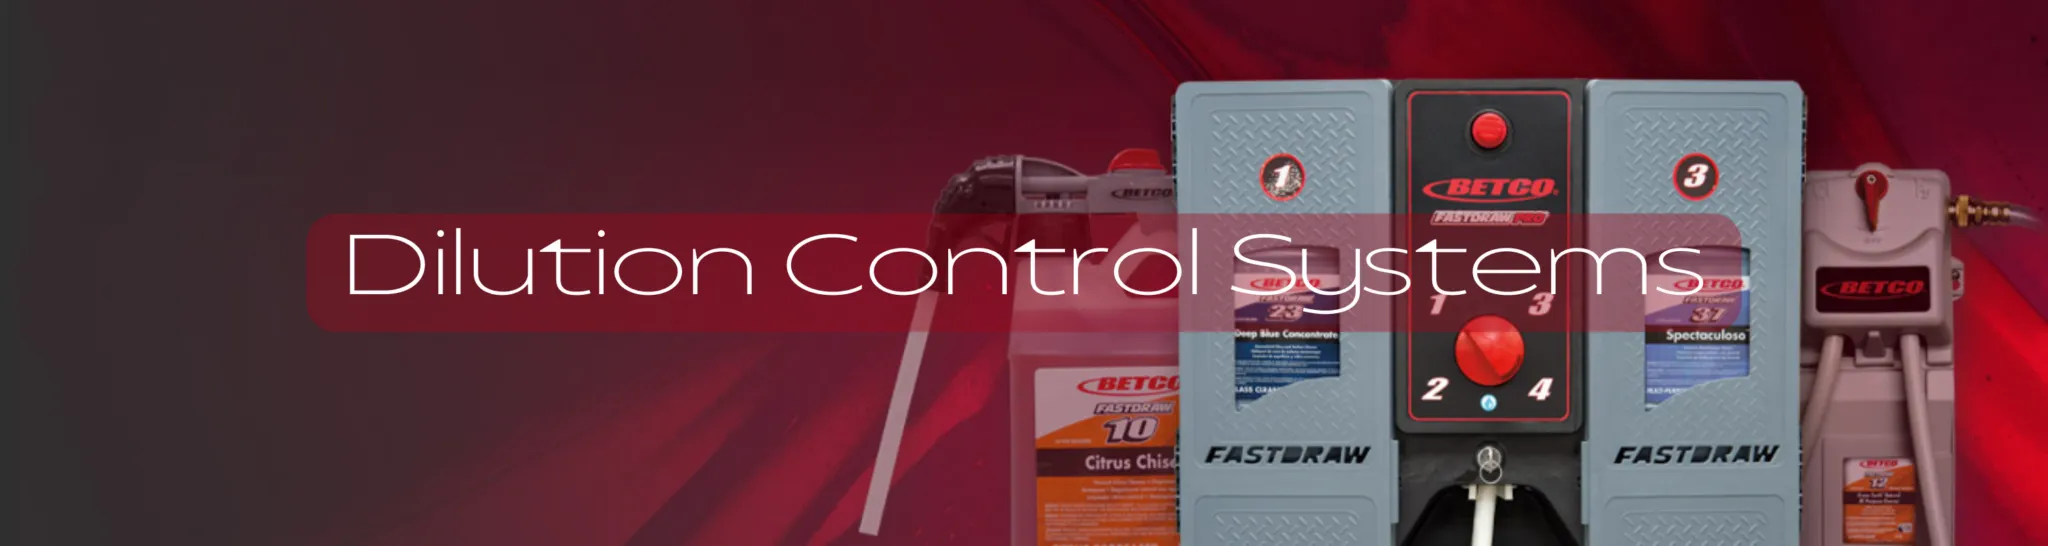 Dilution-Control-Banner-2048x546